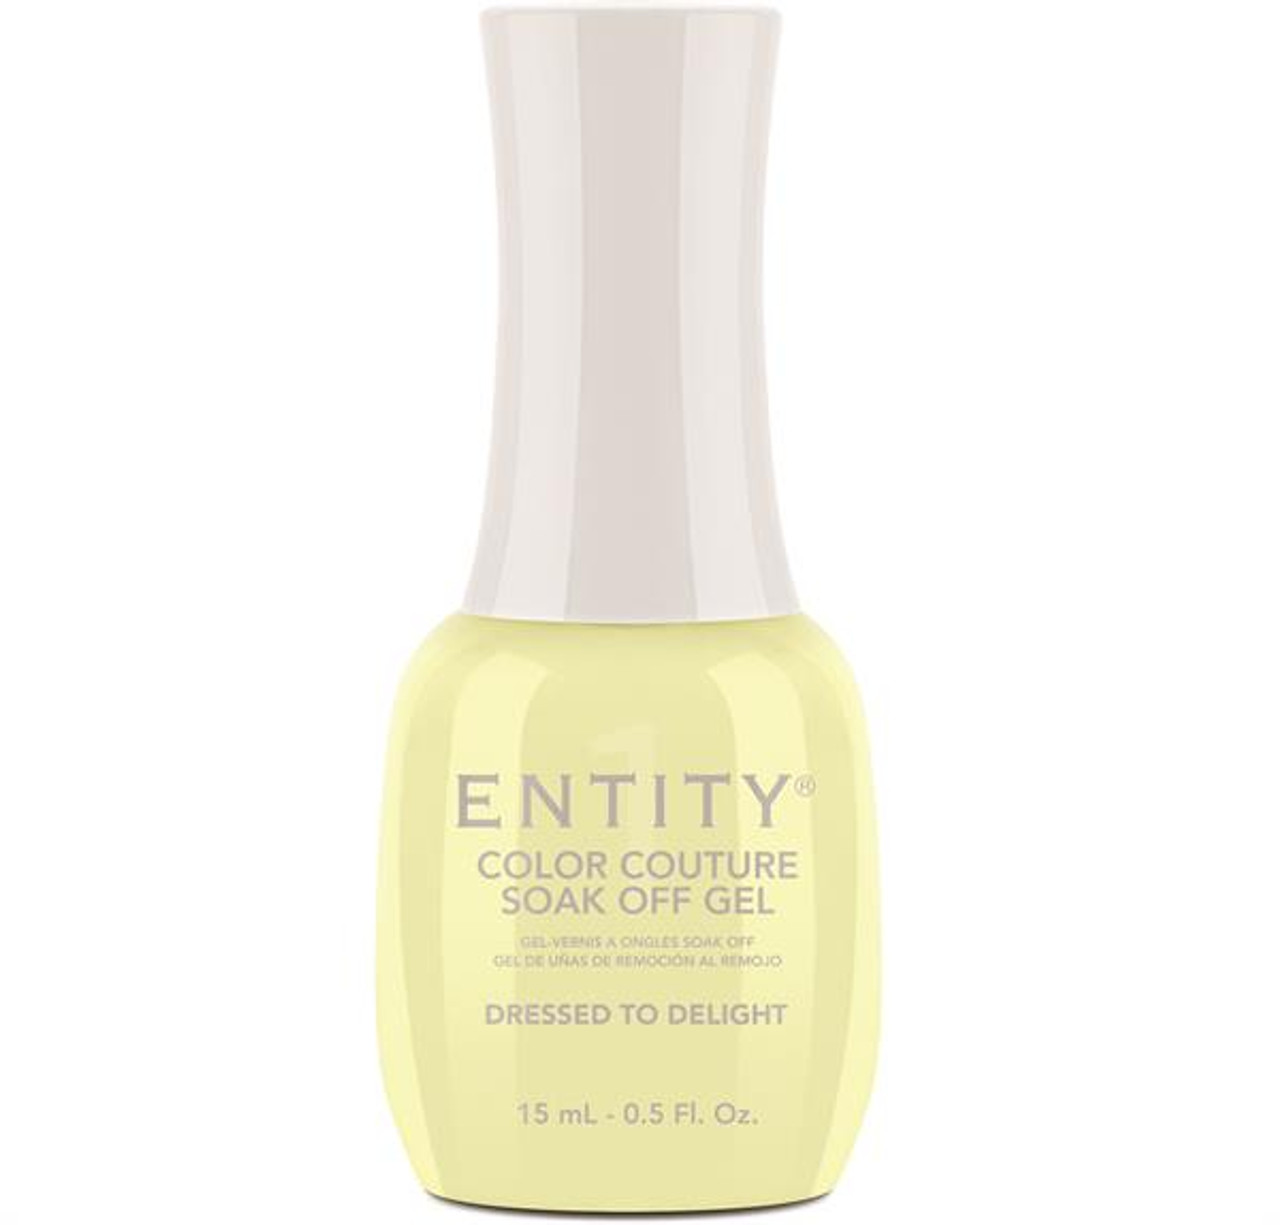 Entity Color Couture Soak Off Gel DRESSED TO DELIGHT - 15 mL / .5 fl oz